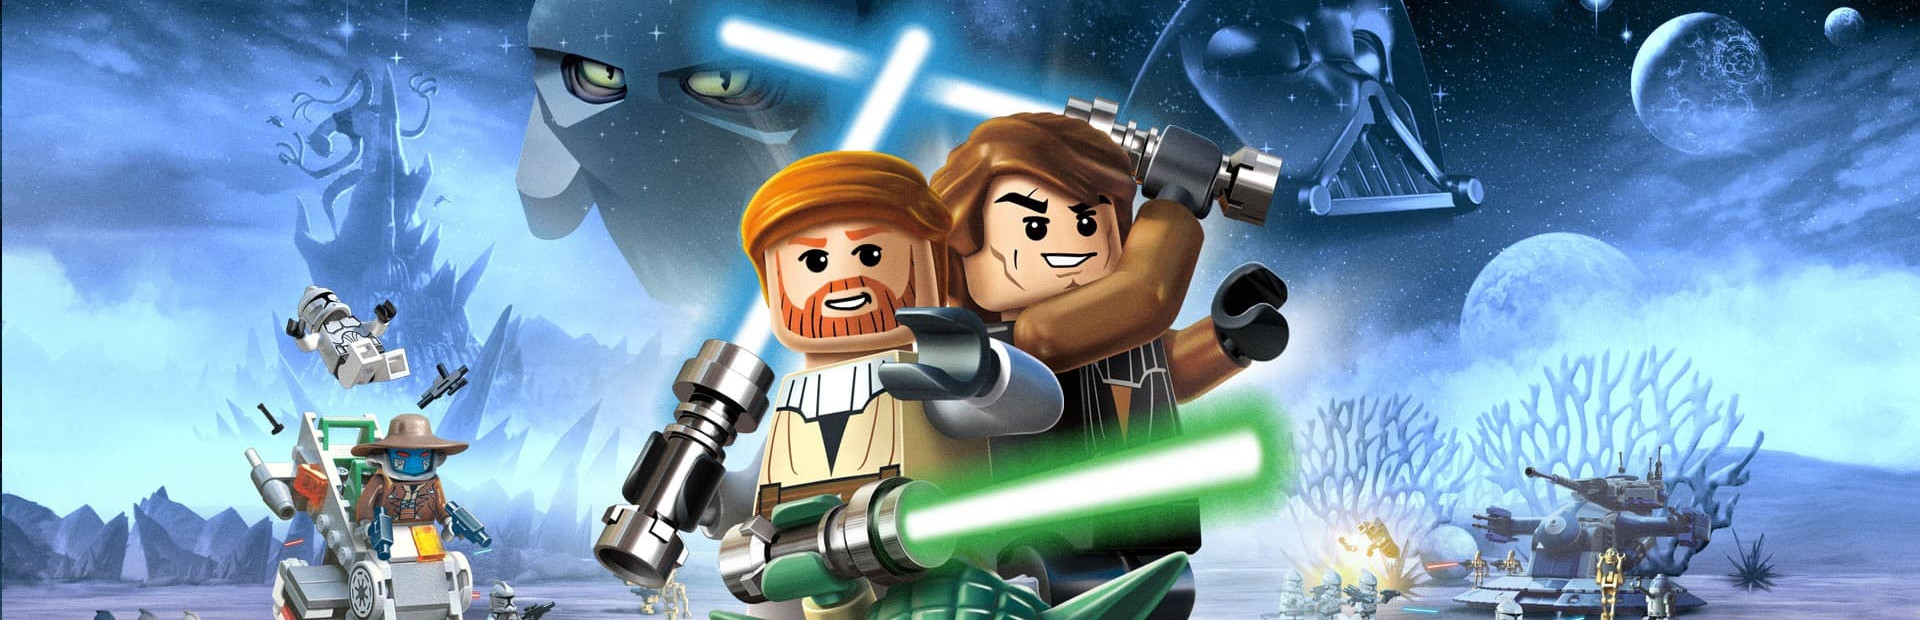 LEGO® Star Wars™ III - The Clone Wars™ cover image